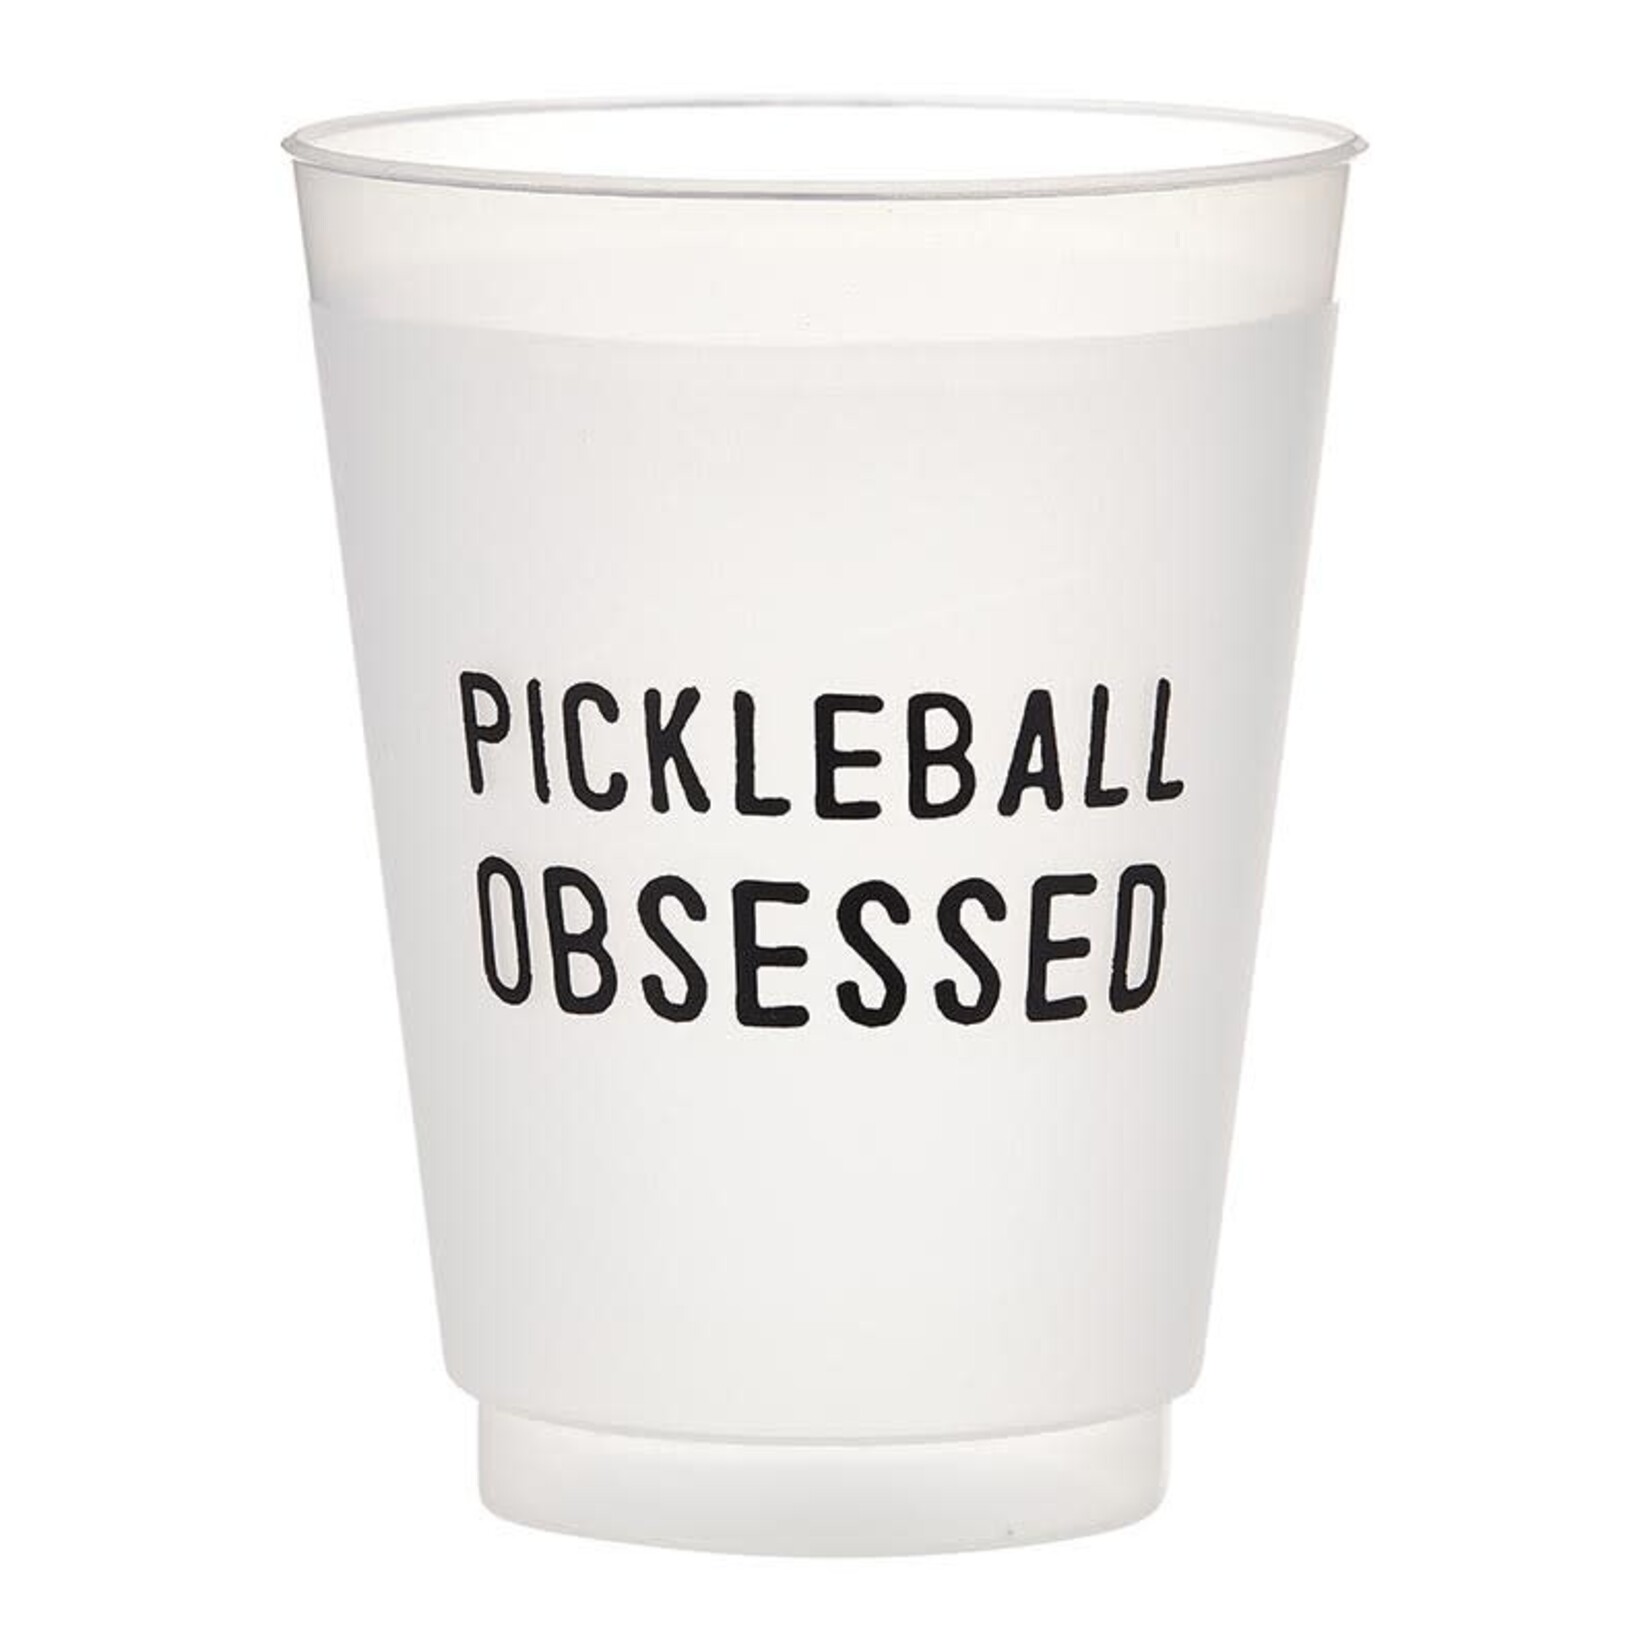 Frost Cup - Pickleball Obsessed 8pk